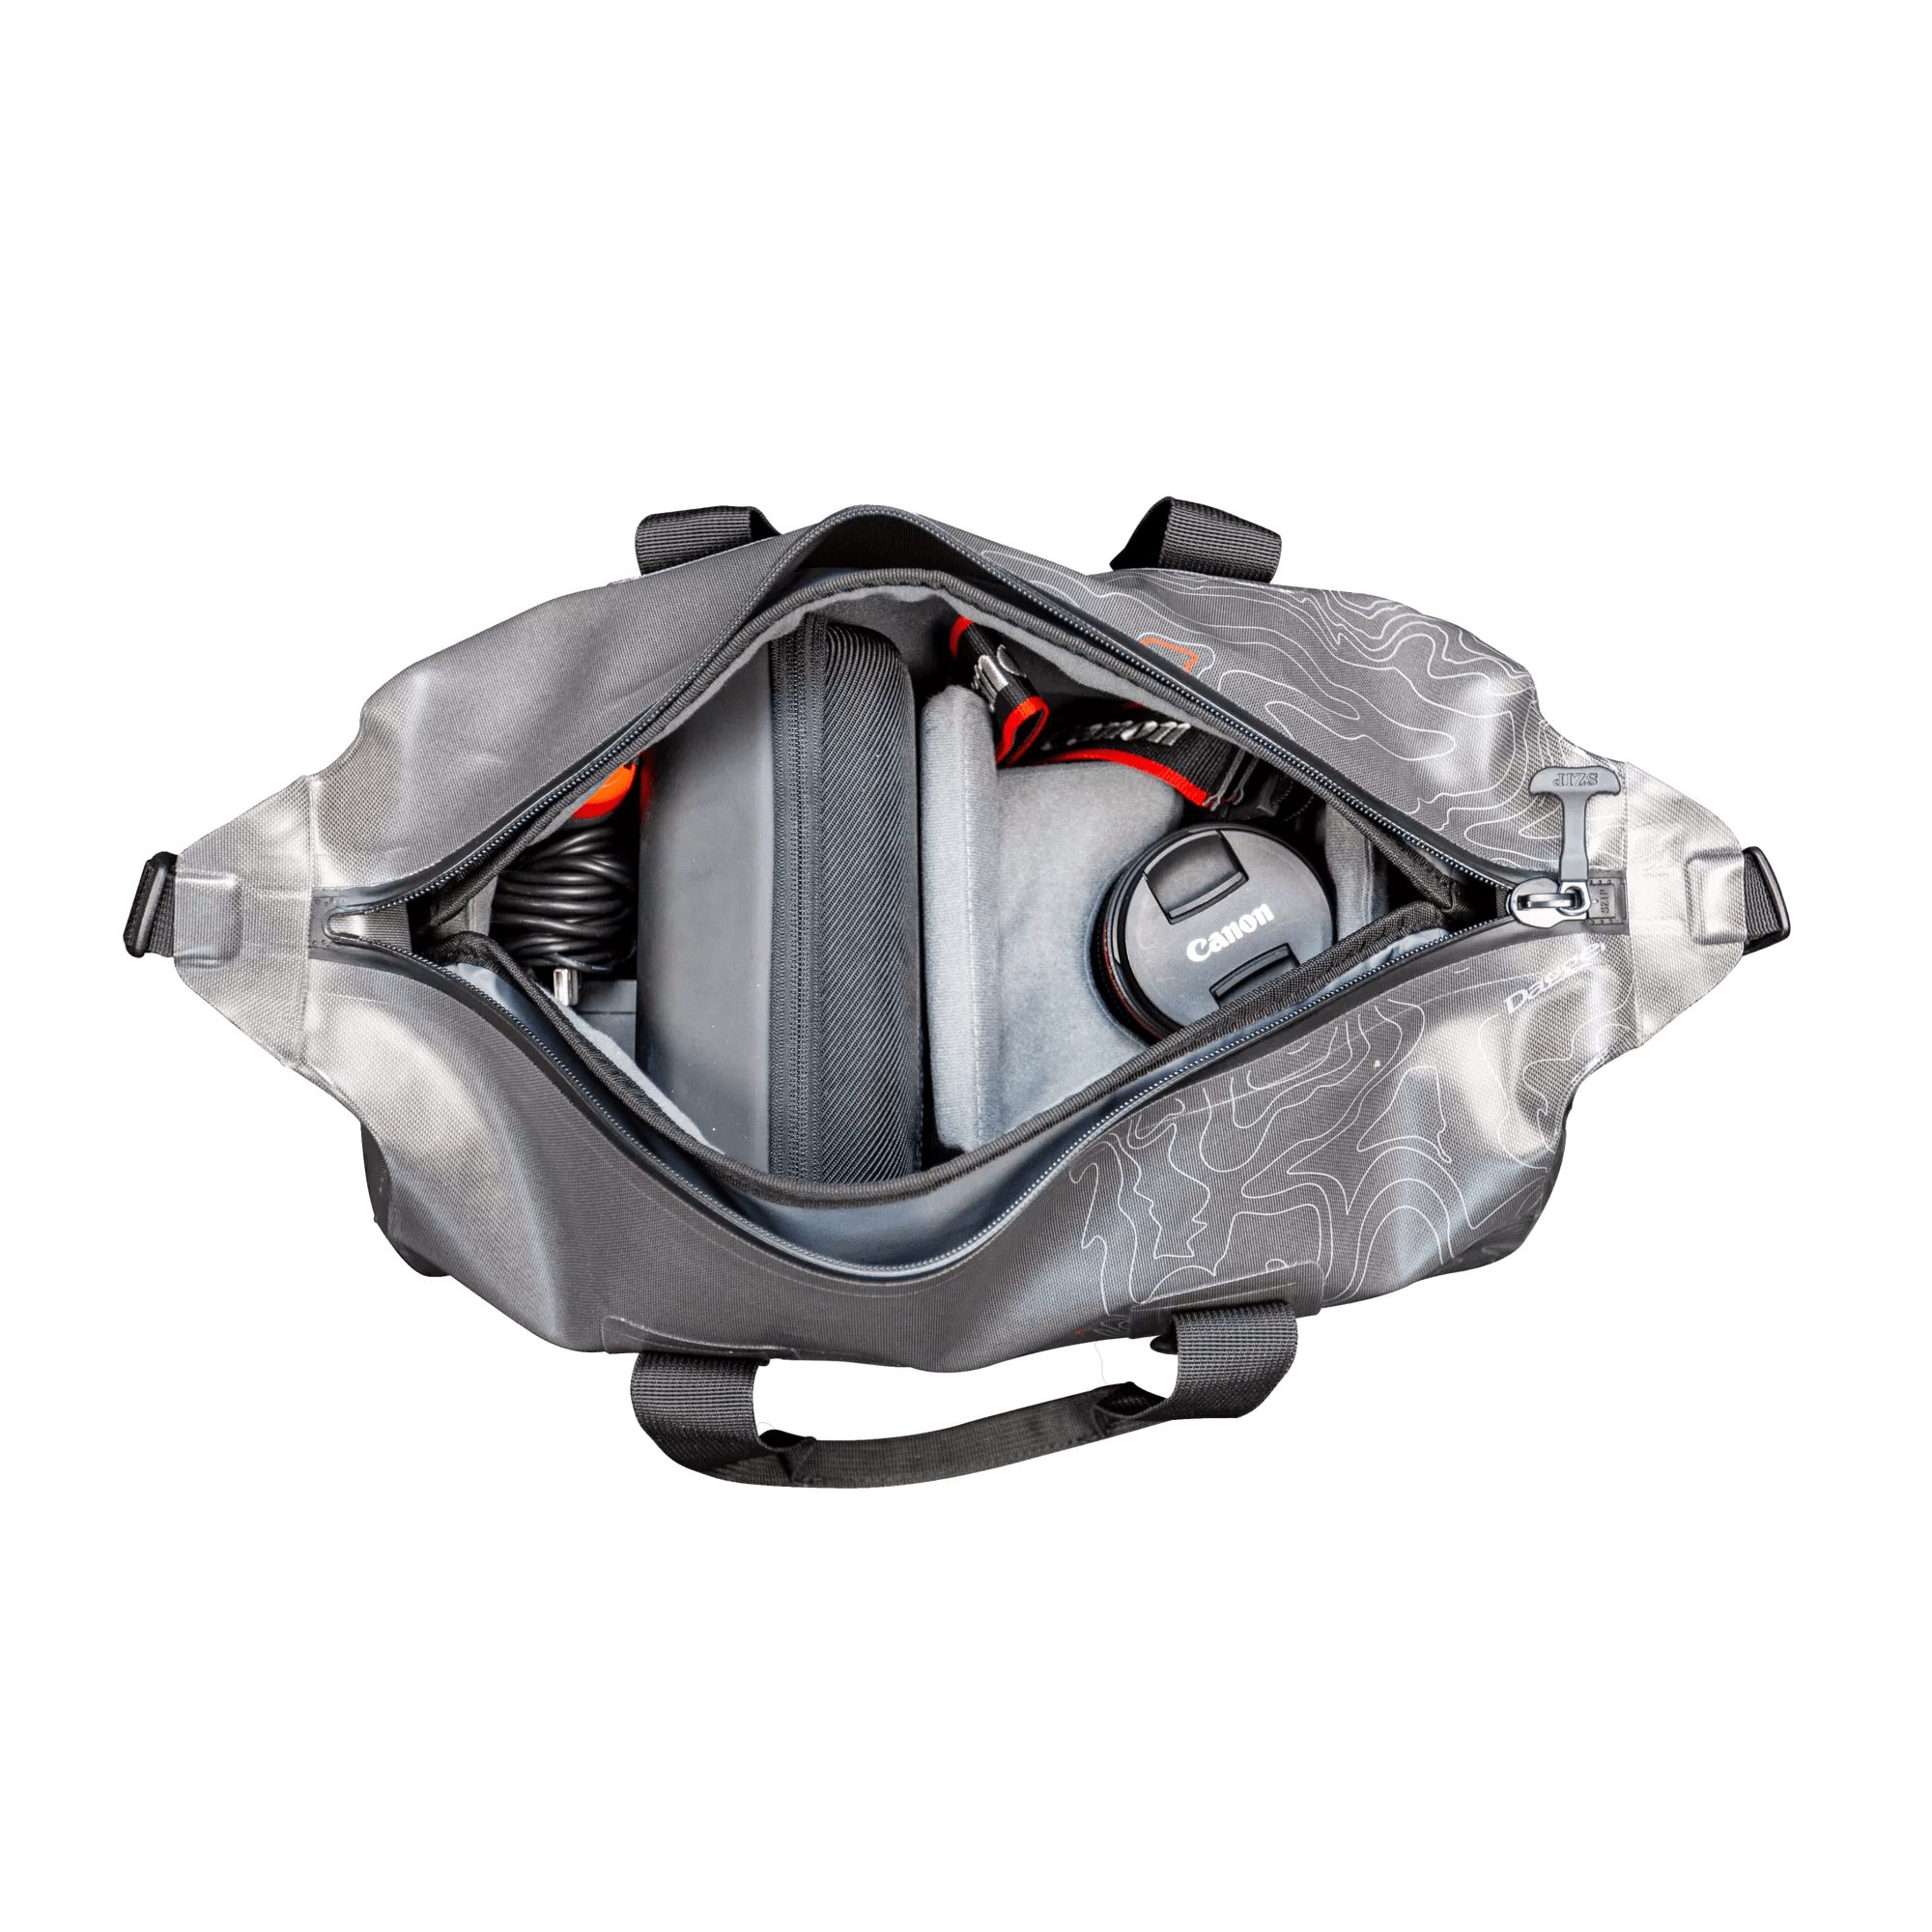 DAGGER - On-Tap Duffell Bag Padded Liner with Dividers - Grey - 8090015 - LIFE STYLE 1